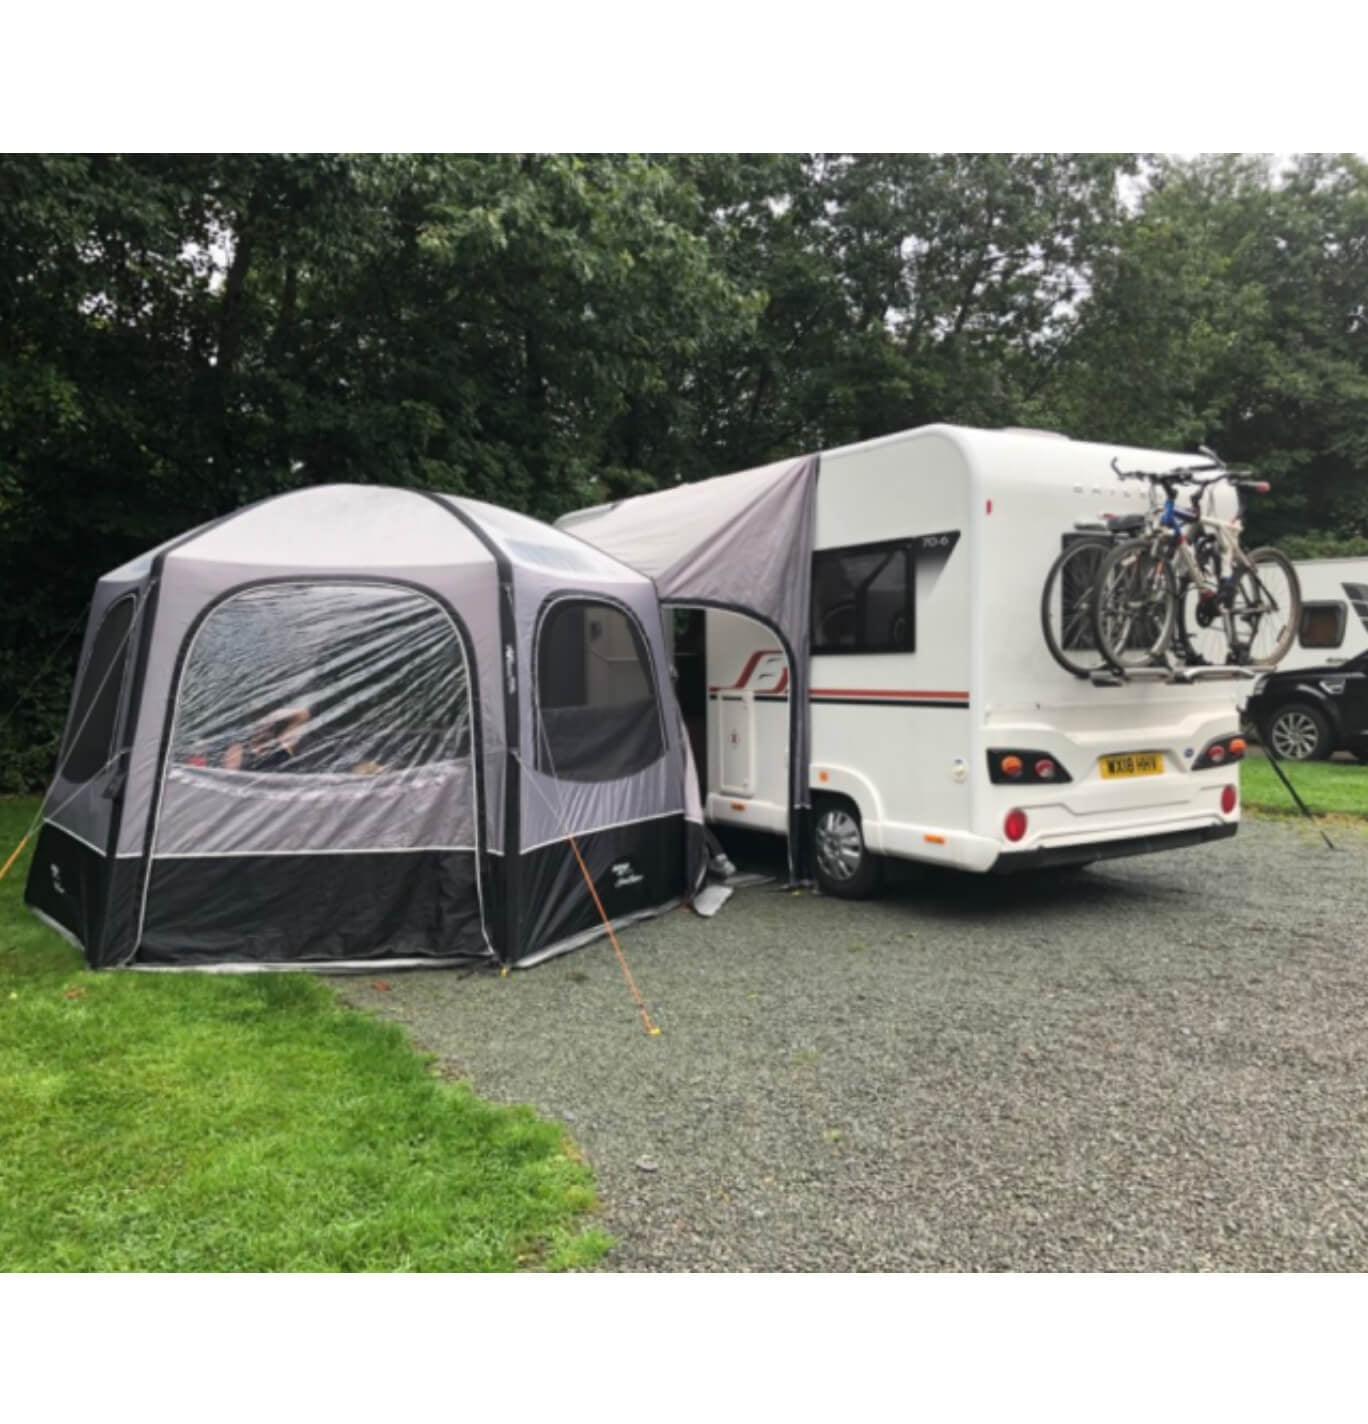 Hexaway on a large motorhome